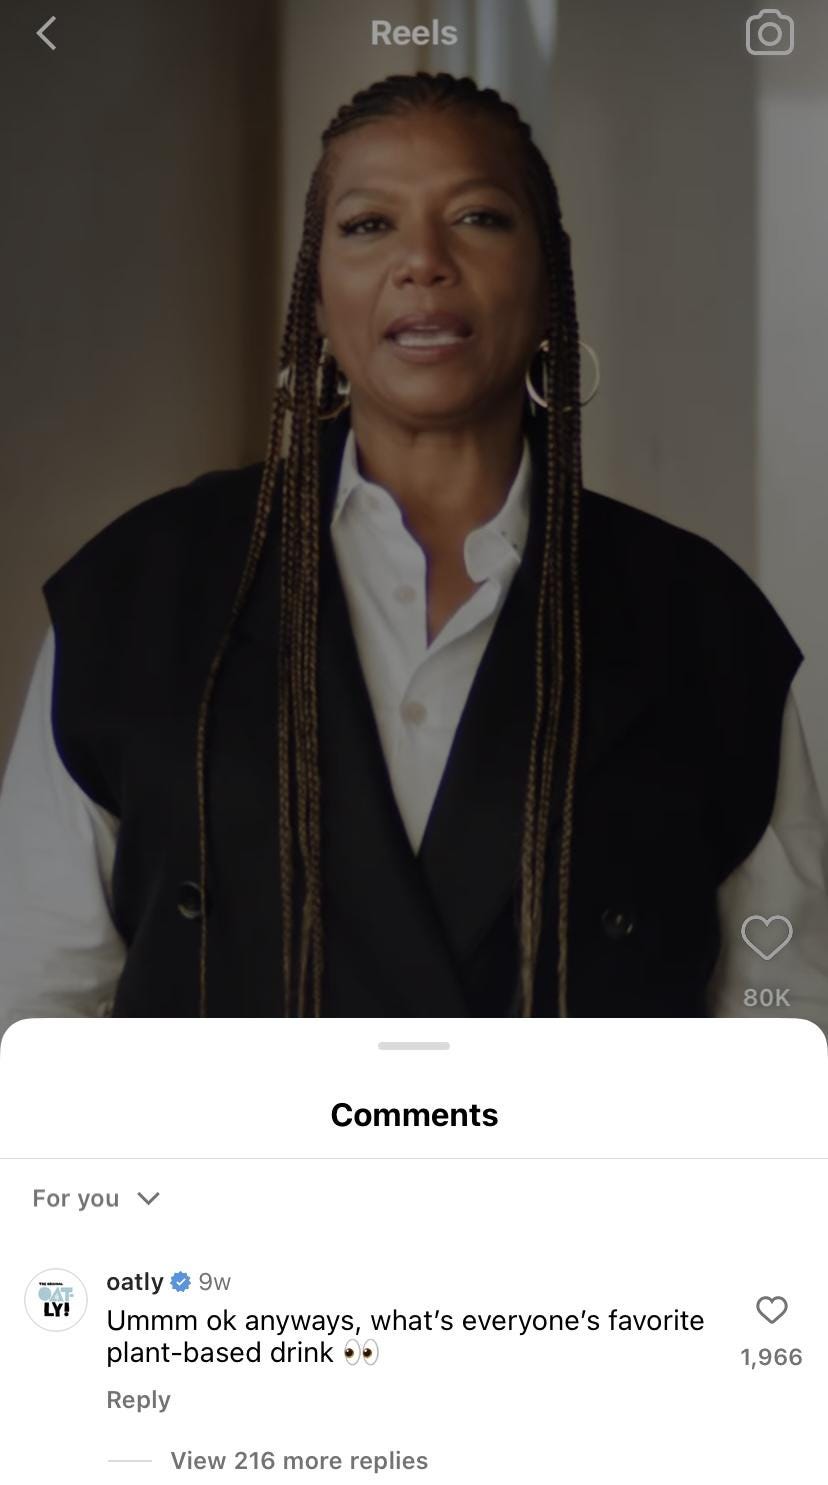 Oatly commenting on a Queen Latifah milk ad with "umm okay anyways, what's everyone's favorite plant-based drink?"